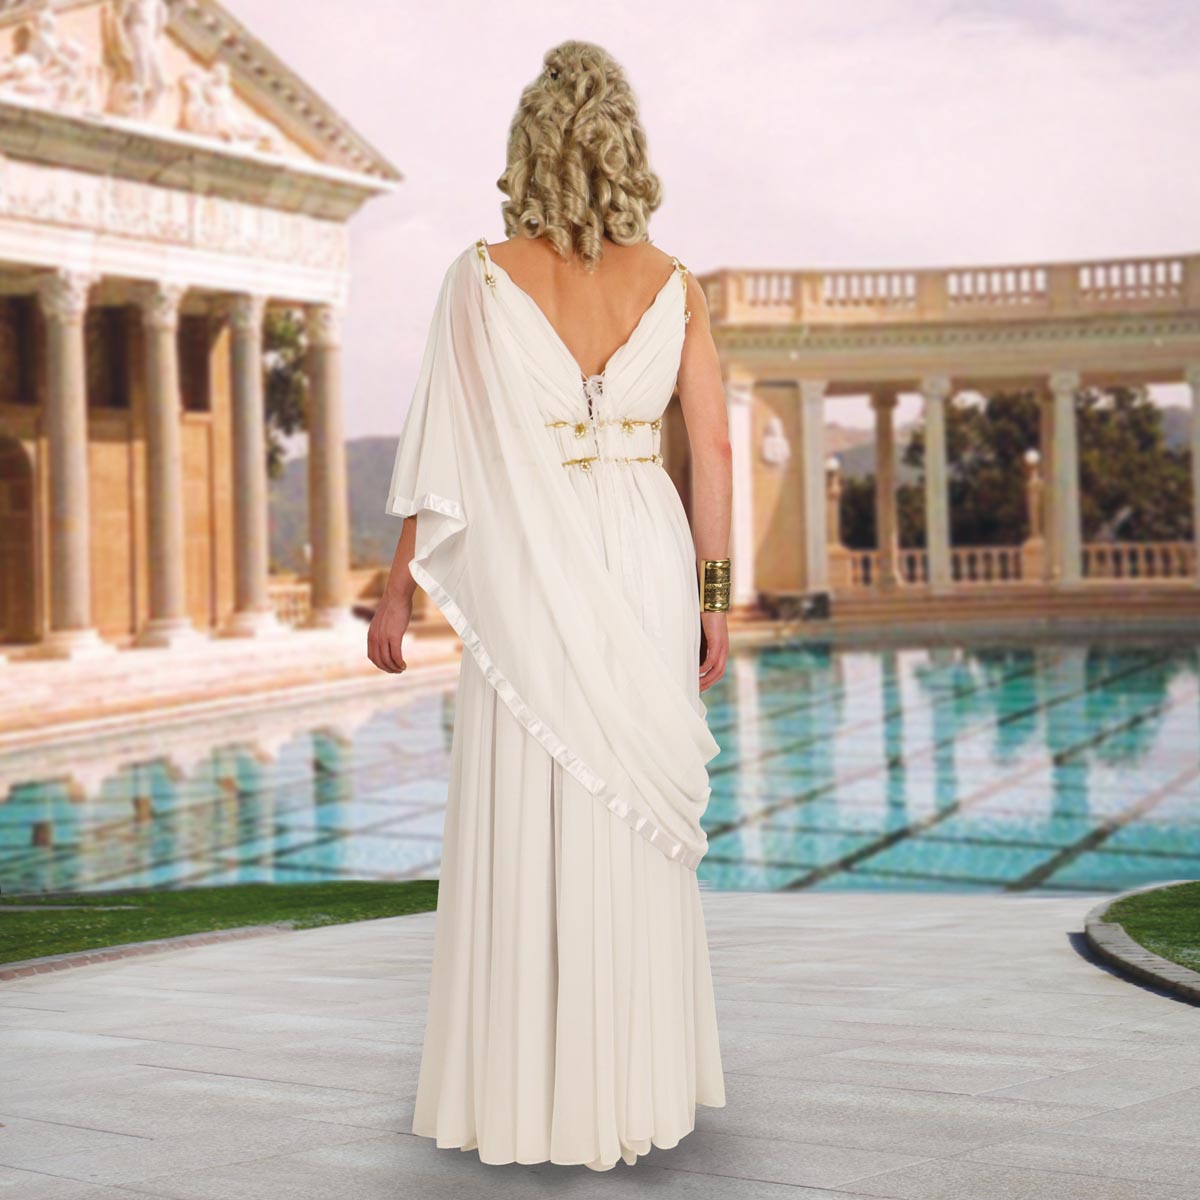 Helen of Troy Gown, Size M